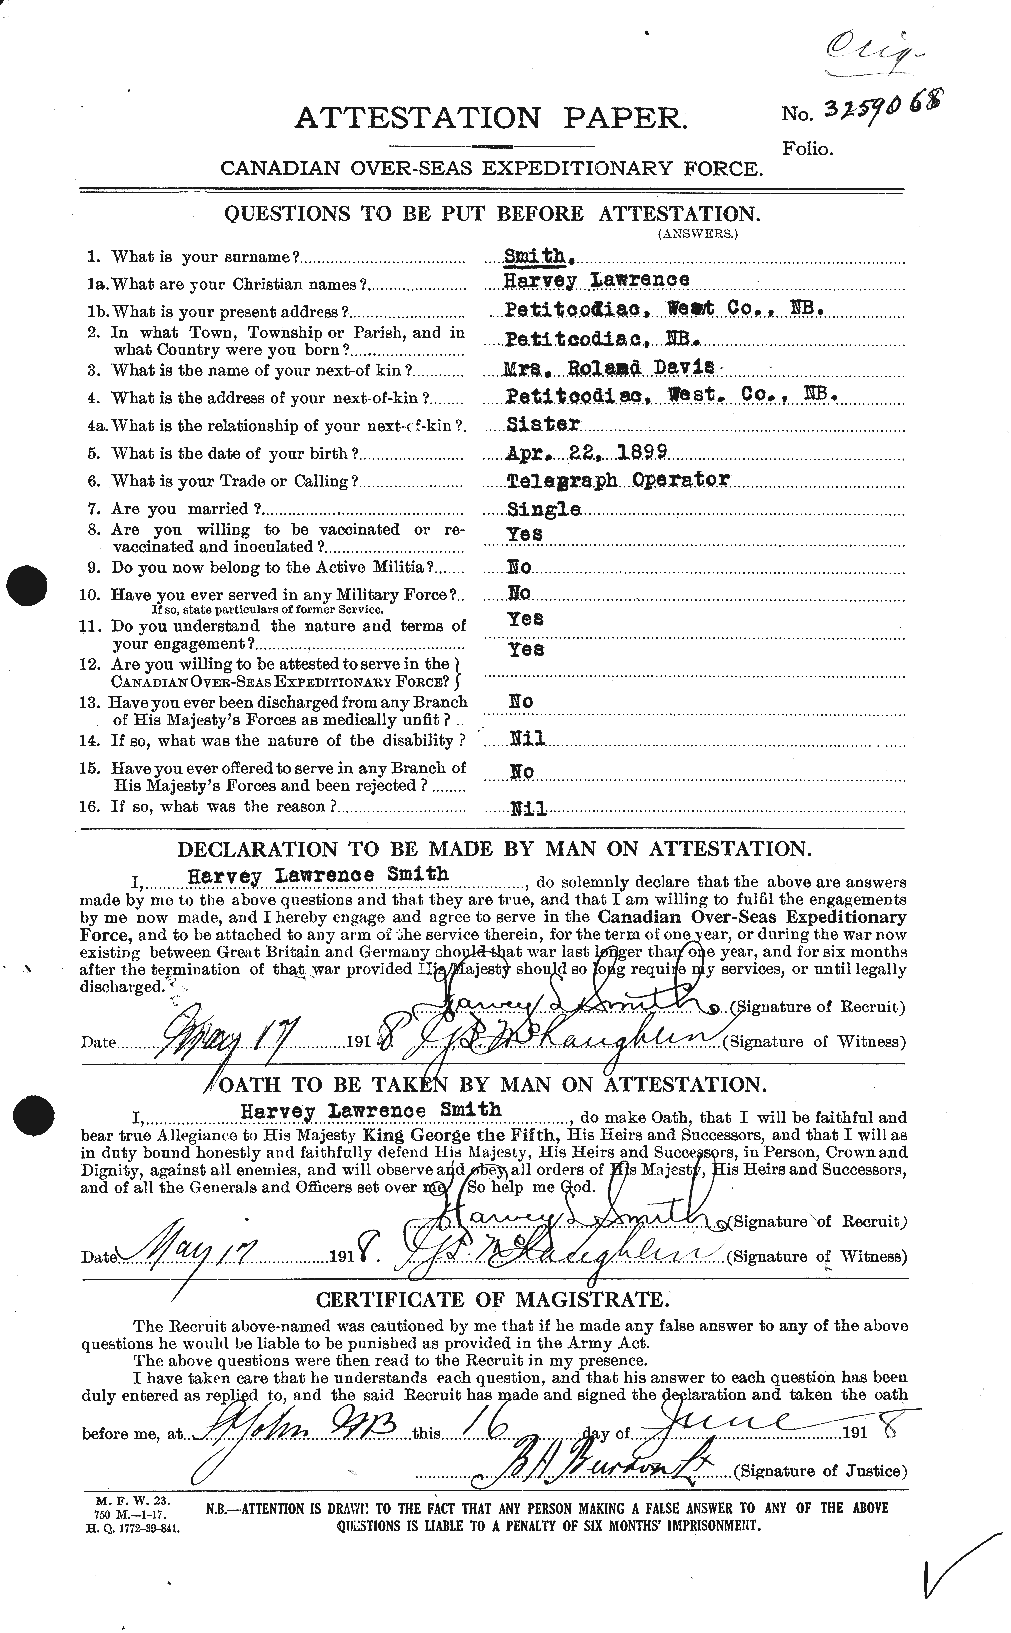 Personnel Records of the First World War - CEF 105190a